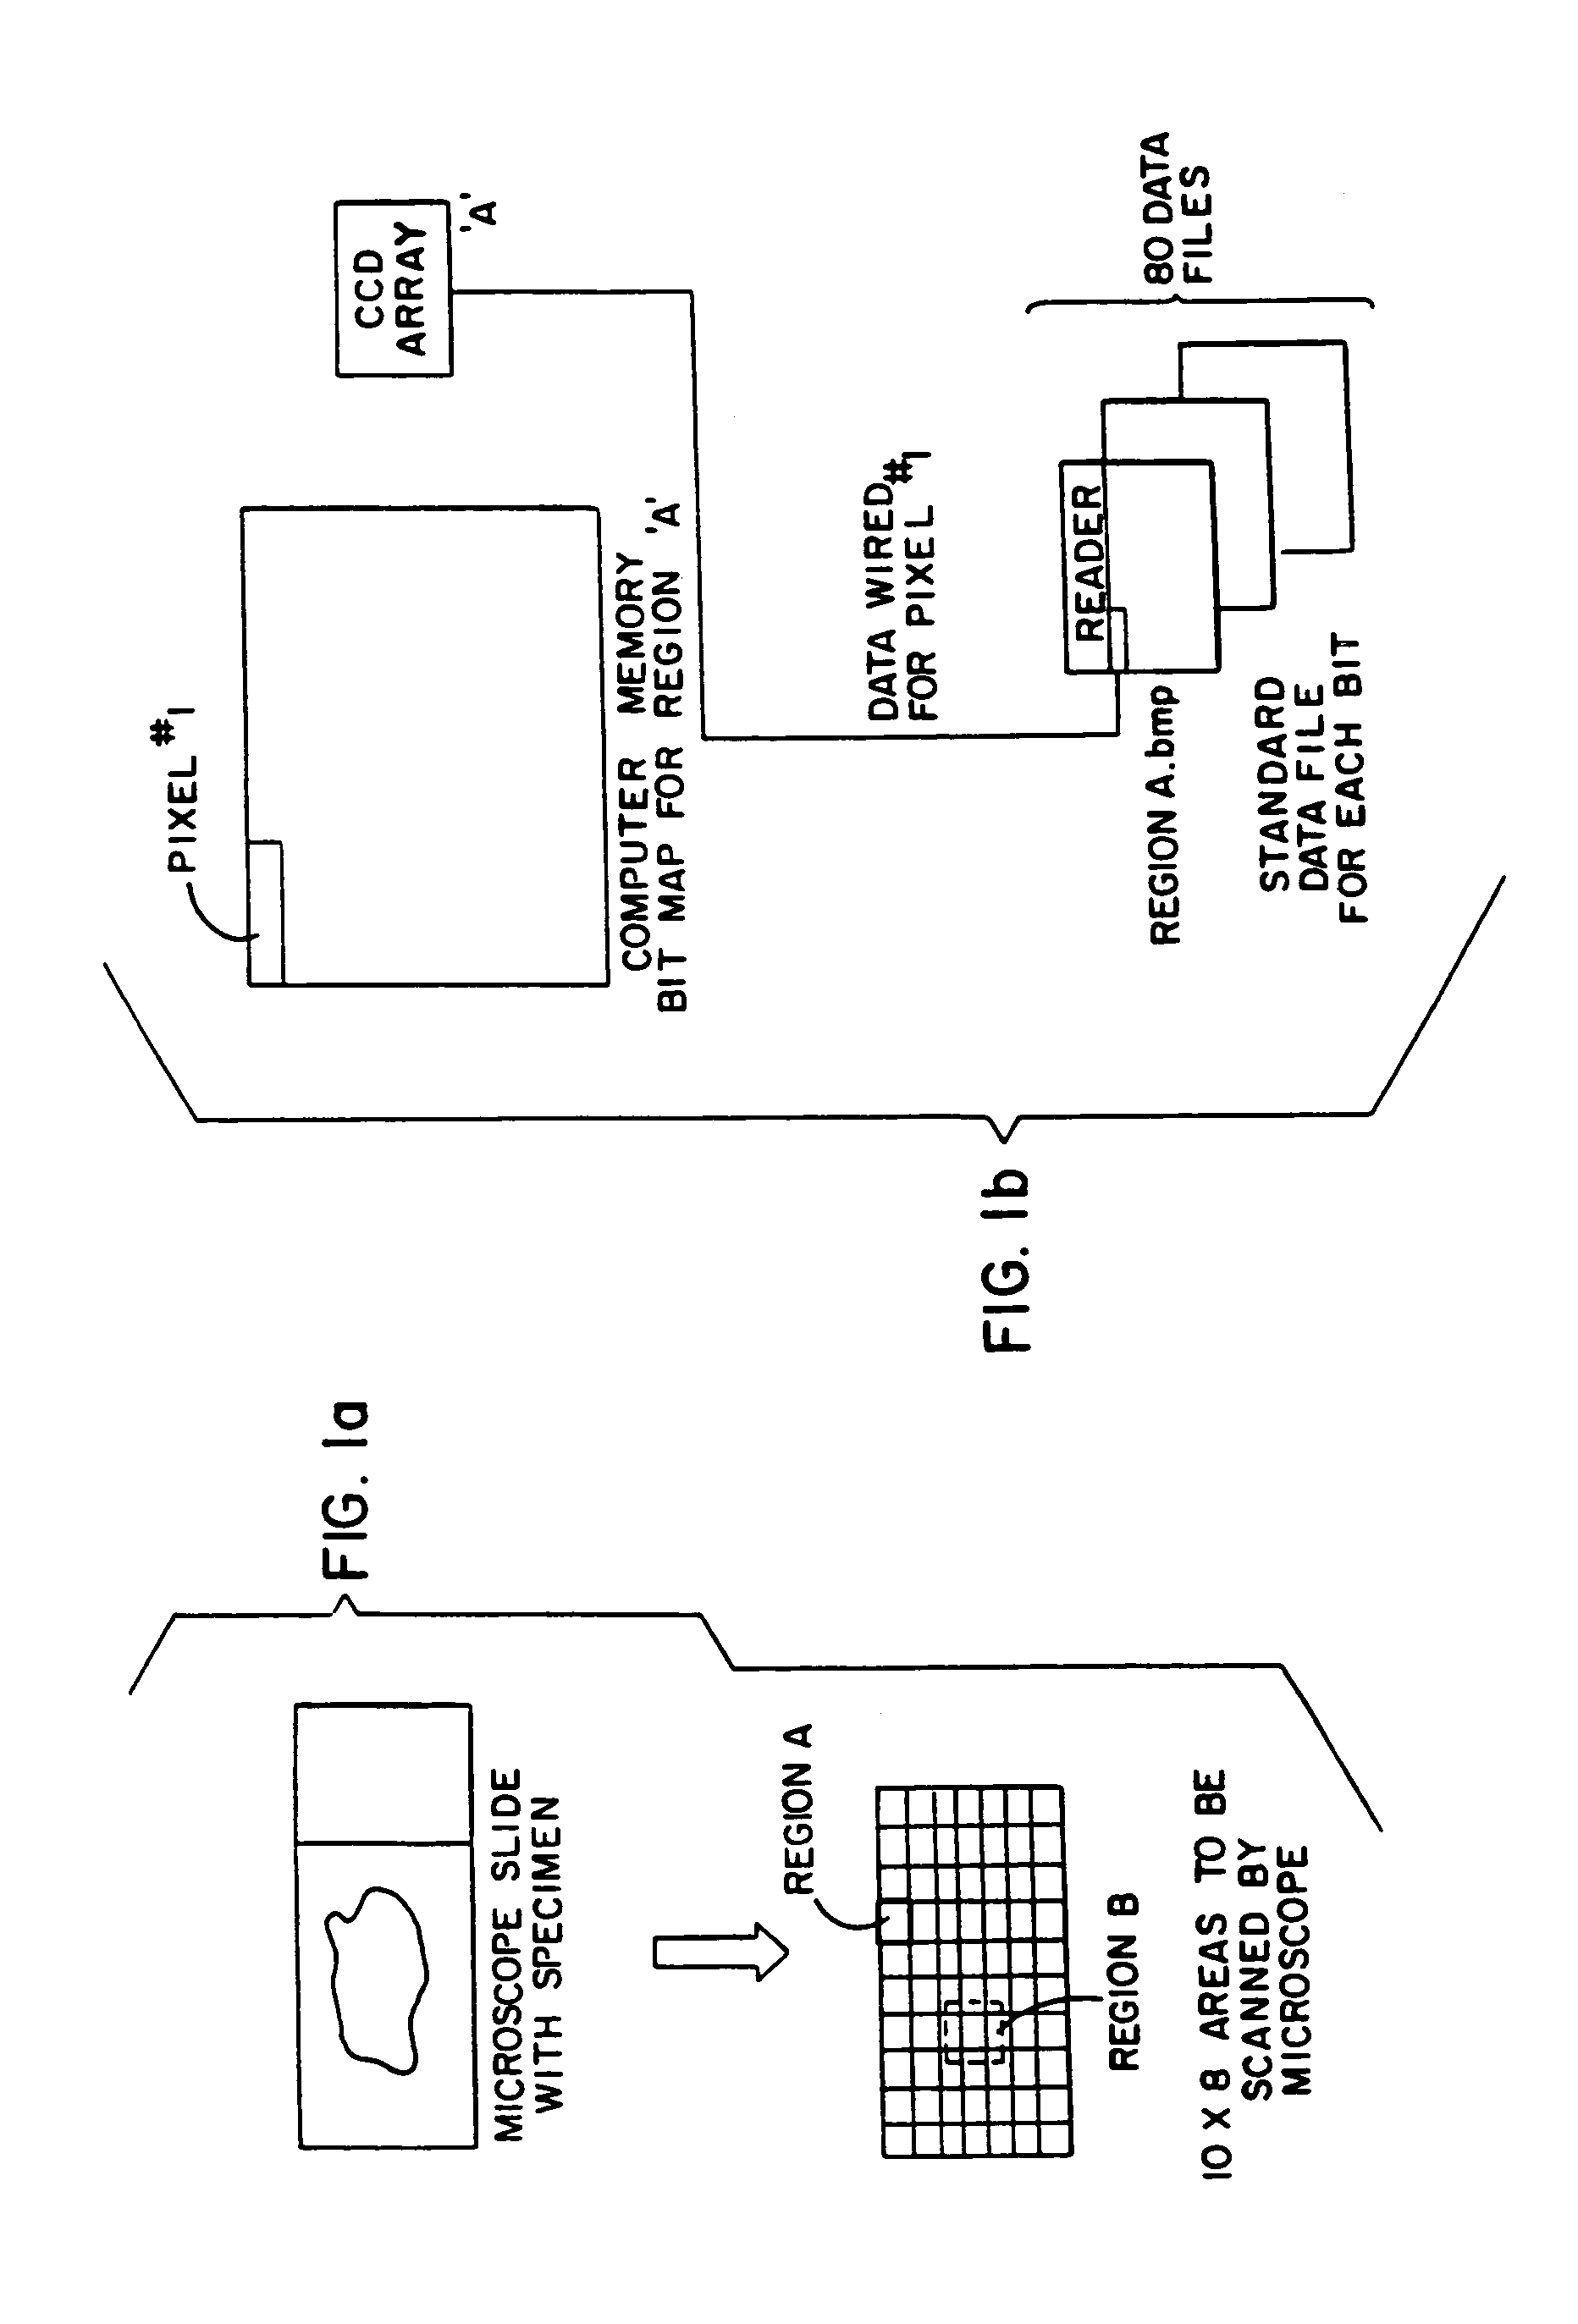 Method and apparatus for internet, intranet, and local viewing of virtual microscope slides